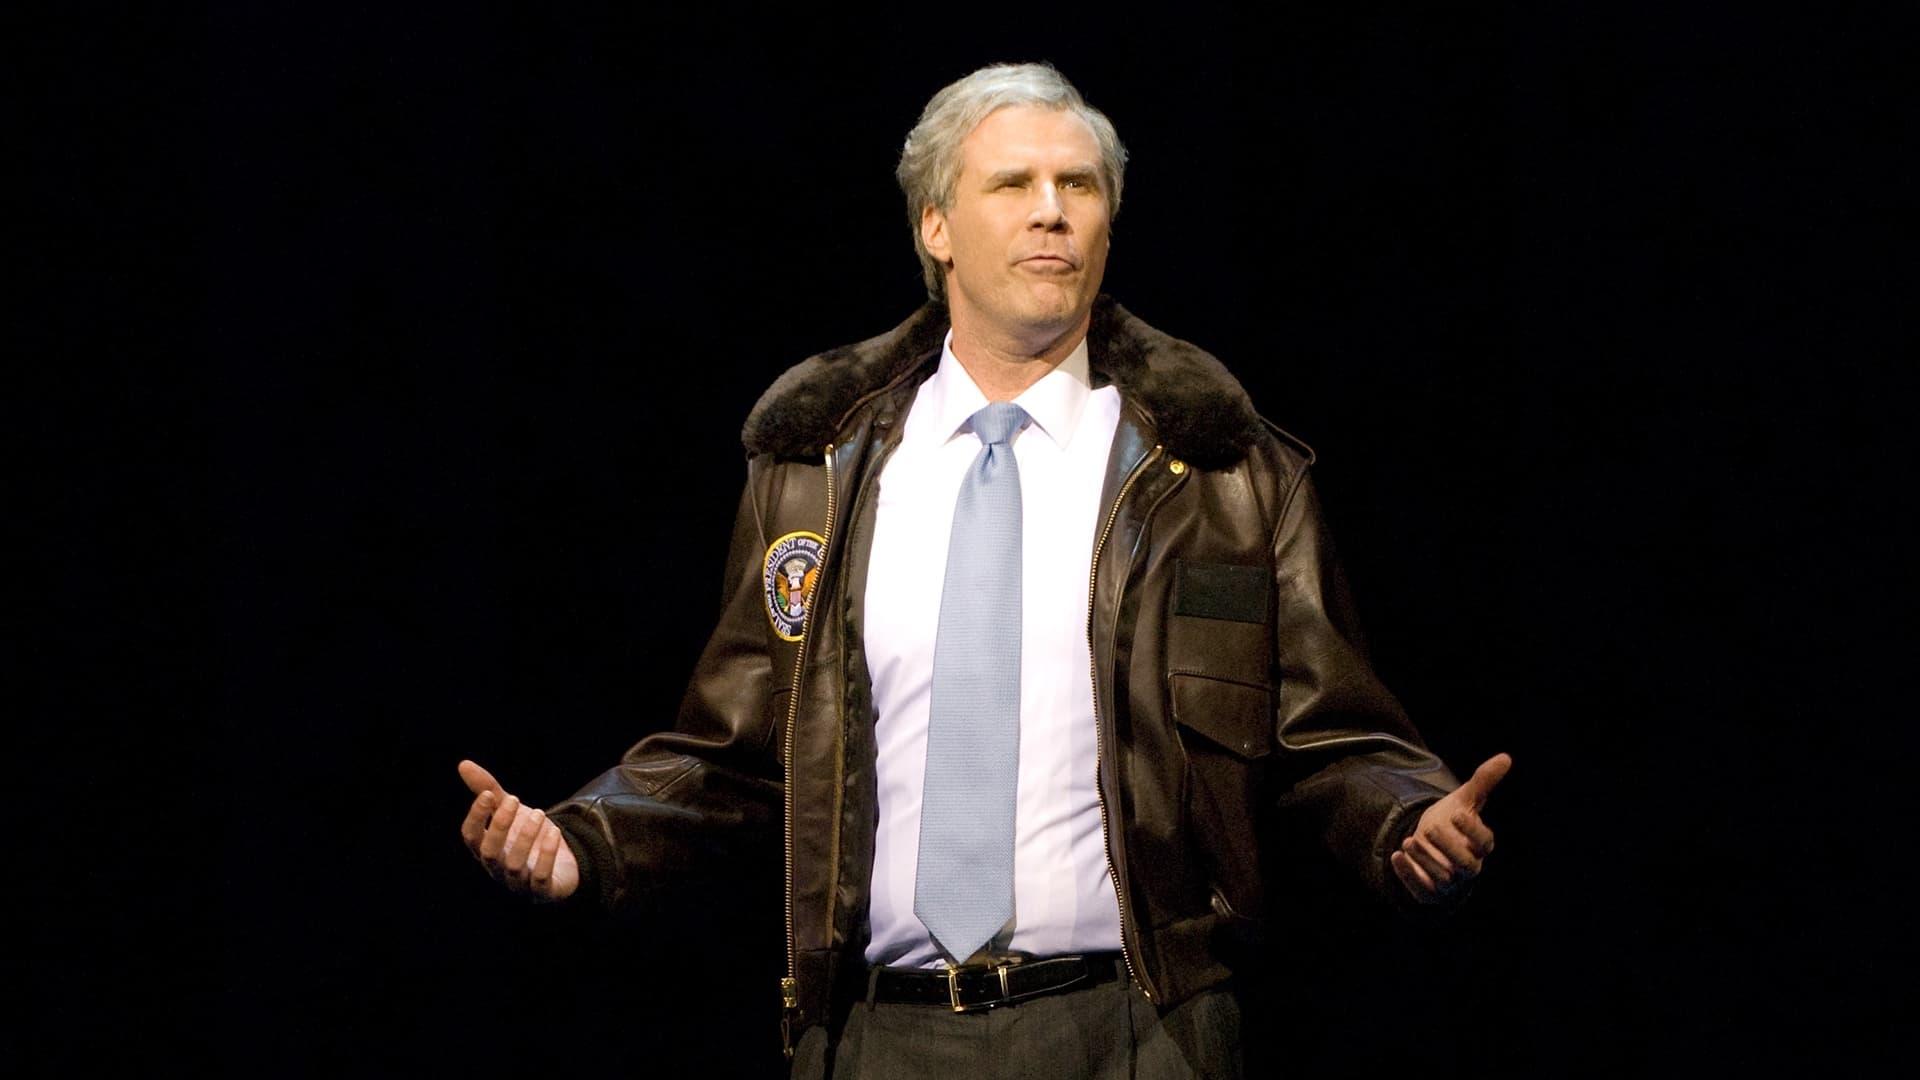 Will Ferrell: You're Welcome America - A Final Night with George W. Bush backdrop